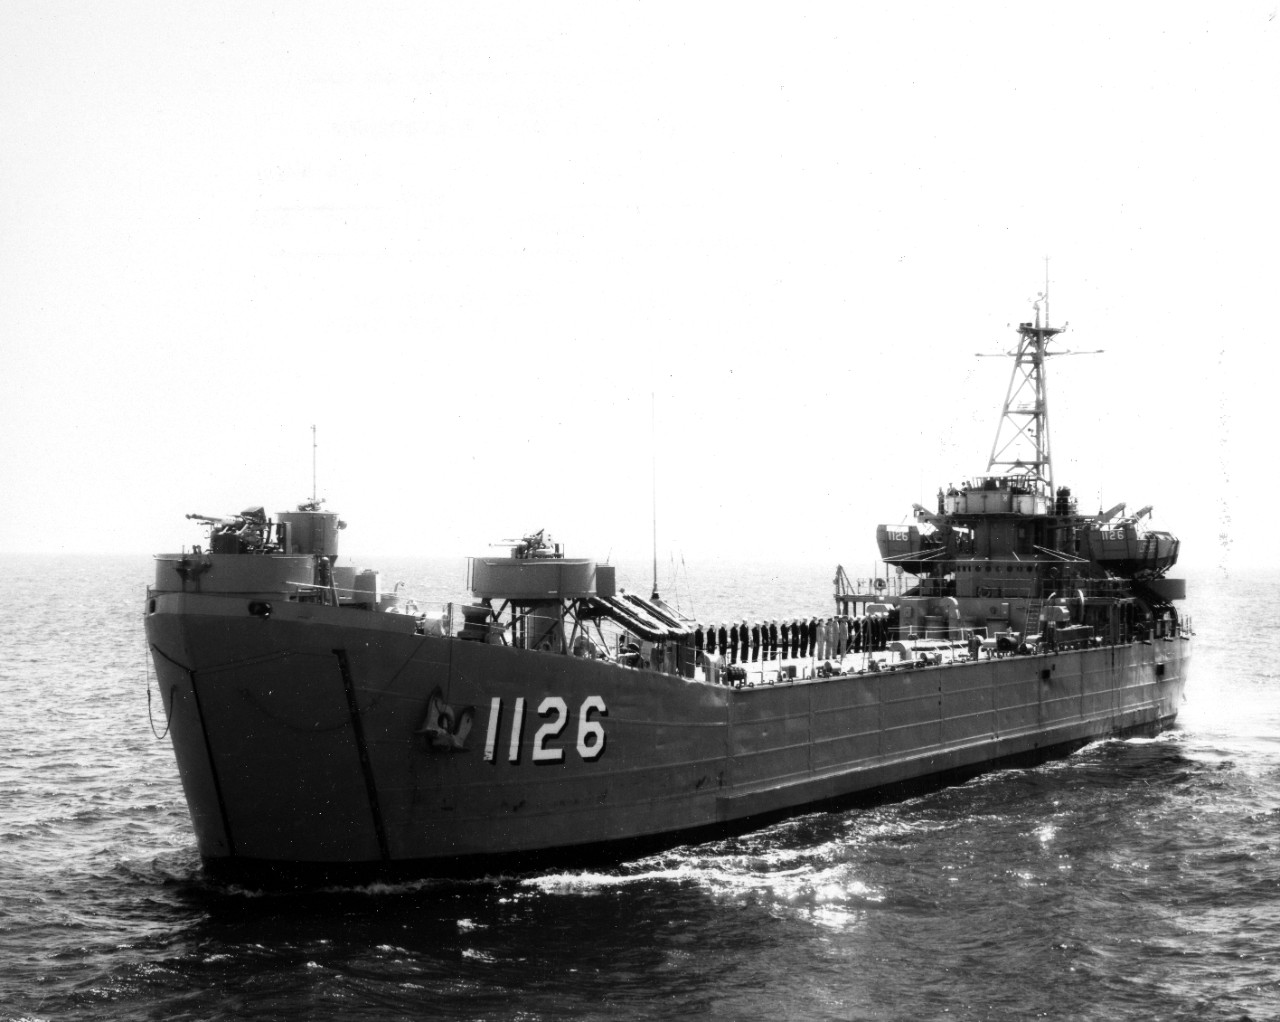 USS Snohomish County (LST-1126)